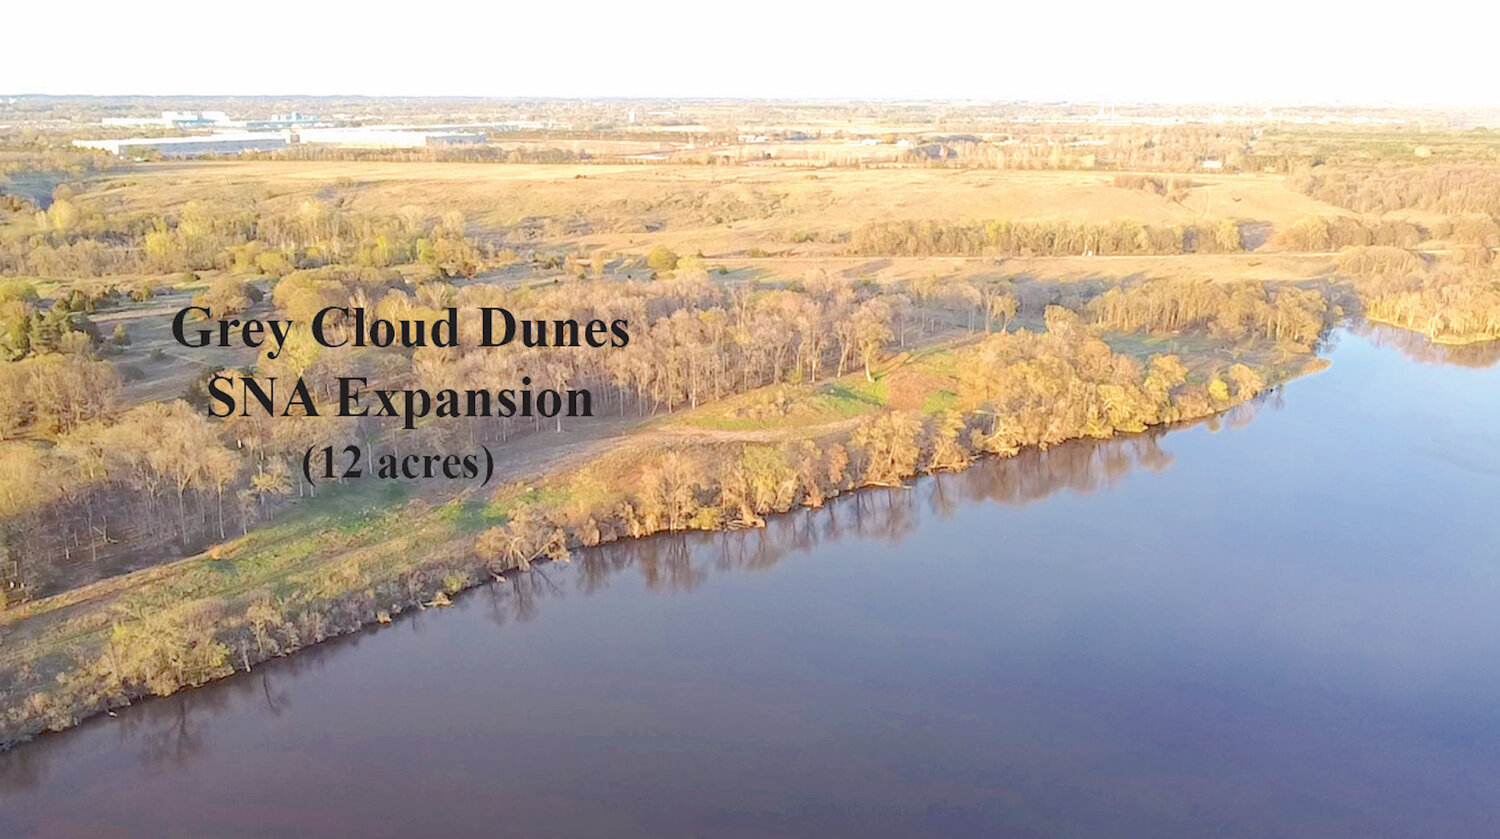 Abutting the Dunes Reserve Park to the east will be a 12 acre extension of the Grey Cloud Dunes Scientific and Natural Area, with rail underpass connecting to the rest of the SNA.